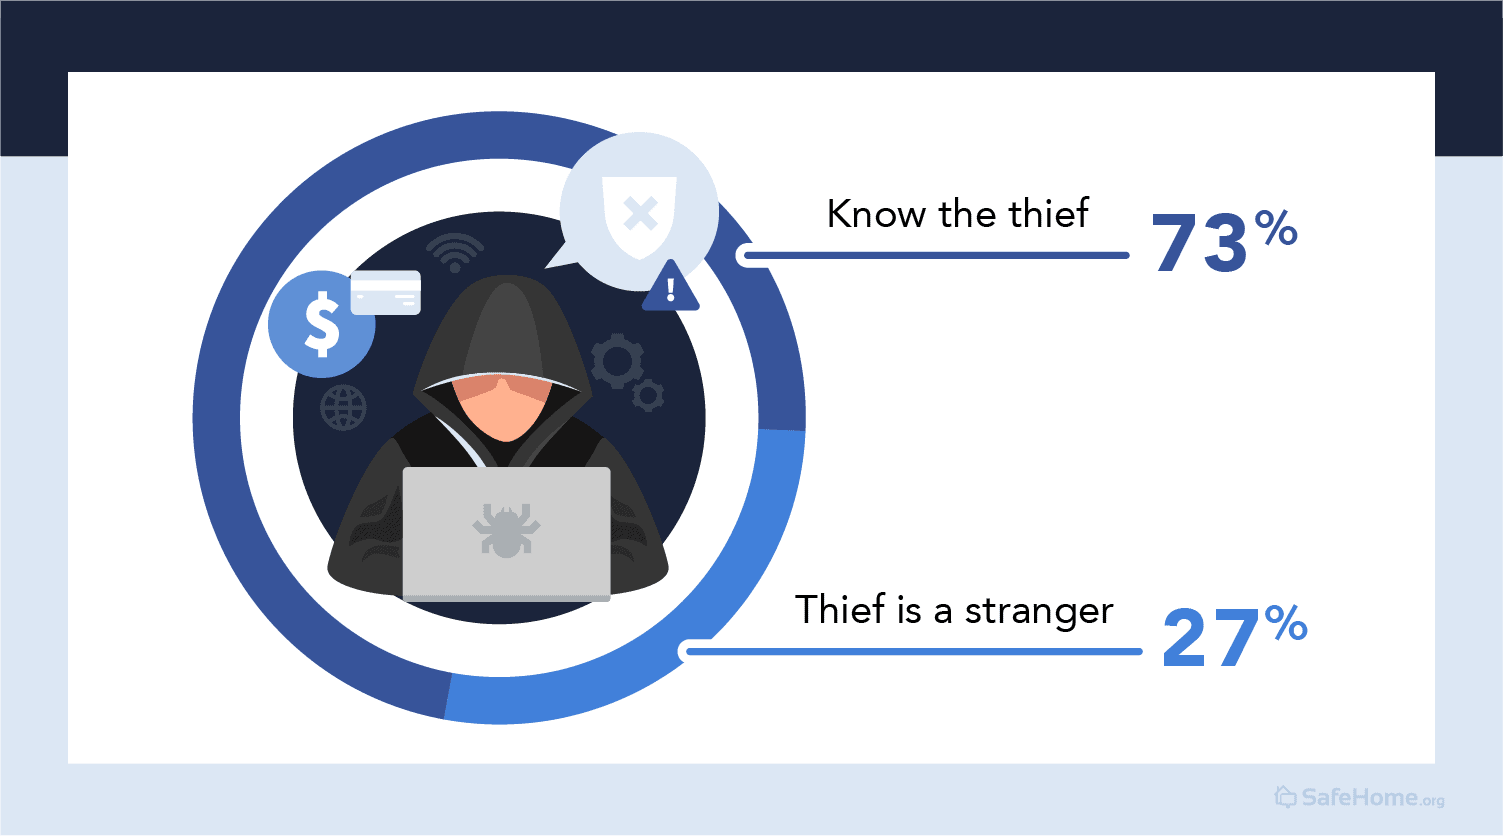 3 out of 4 child identity theft victims know the thieves